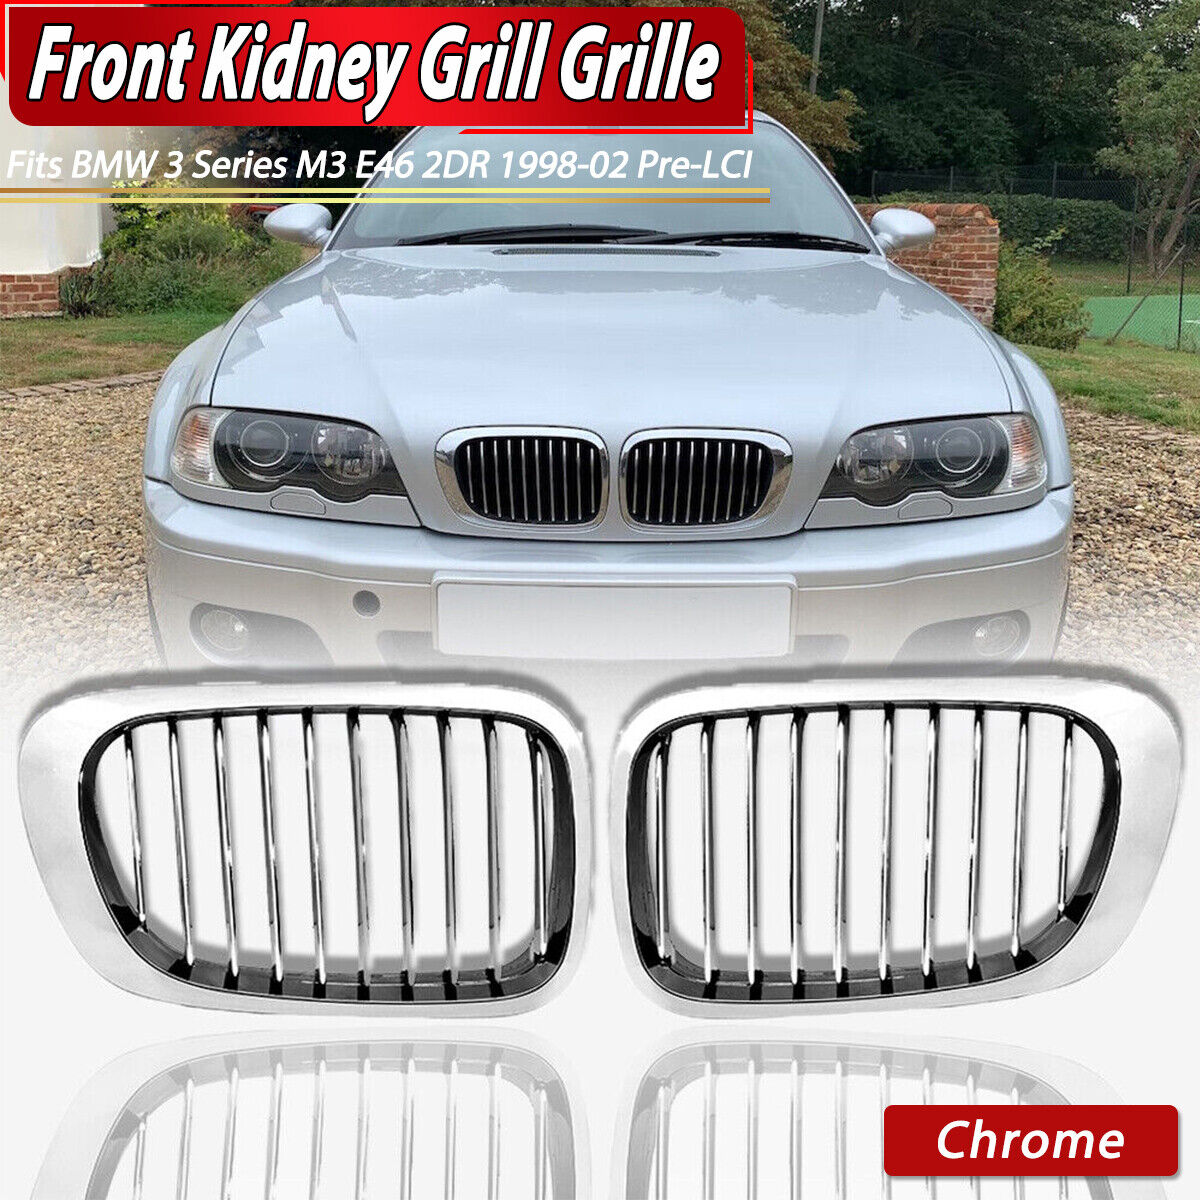 Chrome Front Kidney Grille For 1999-02 BMW 3 Series E46 325Ci 330Ci Convertible